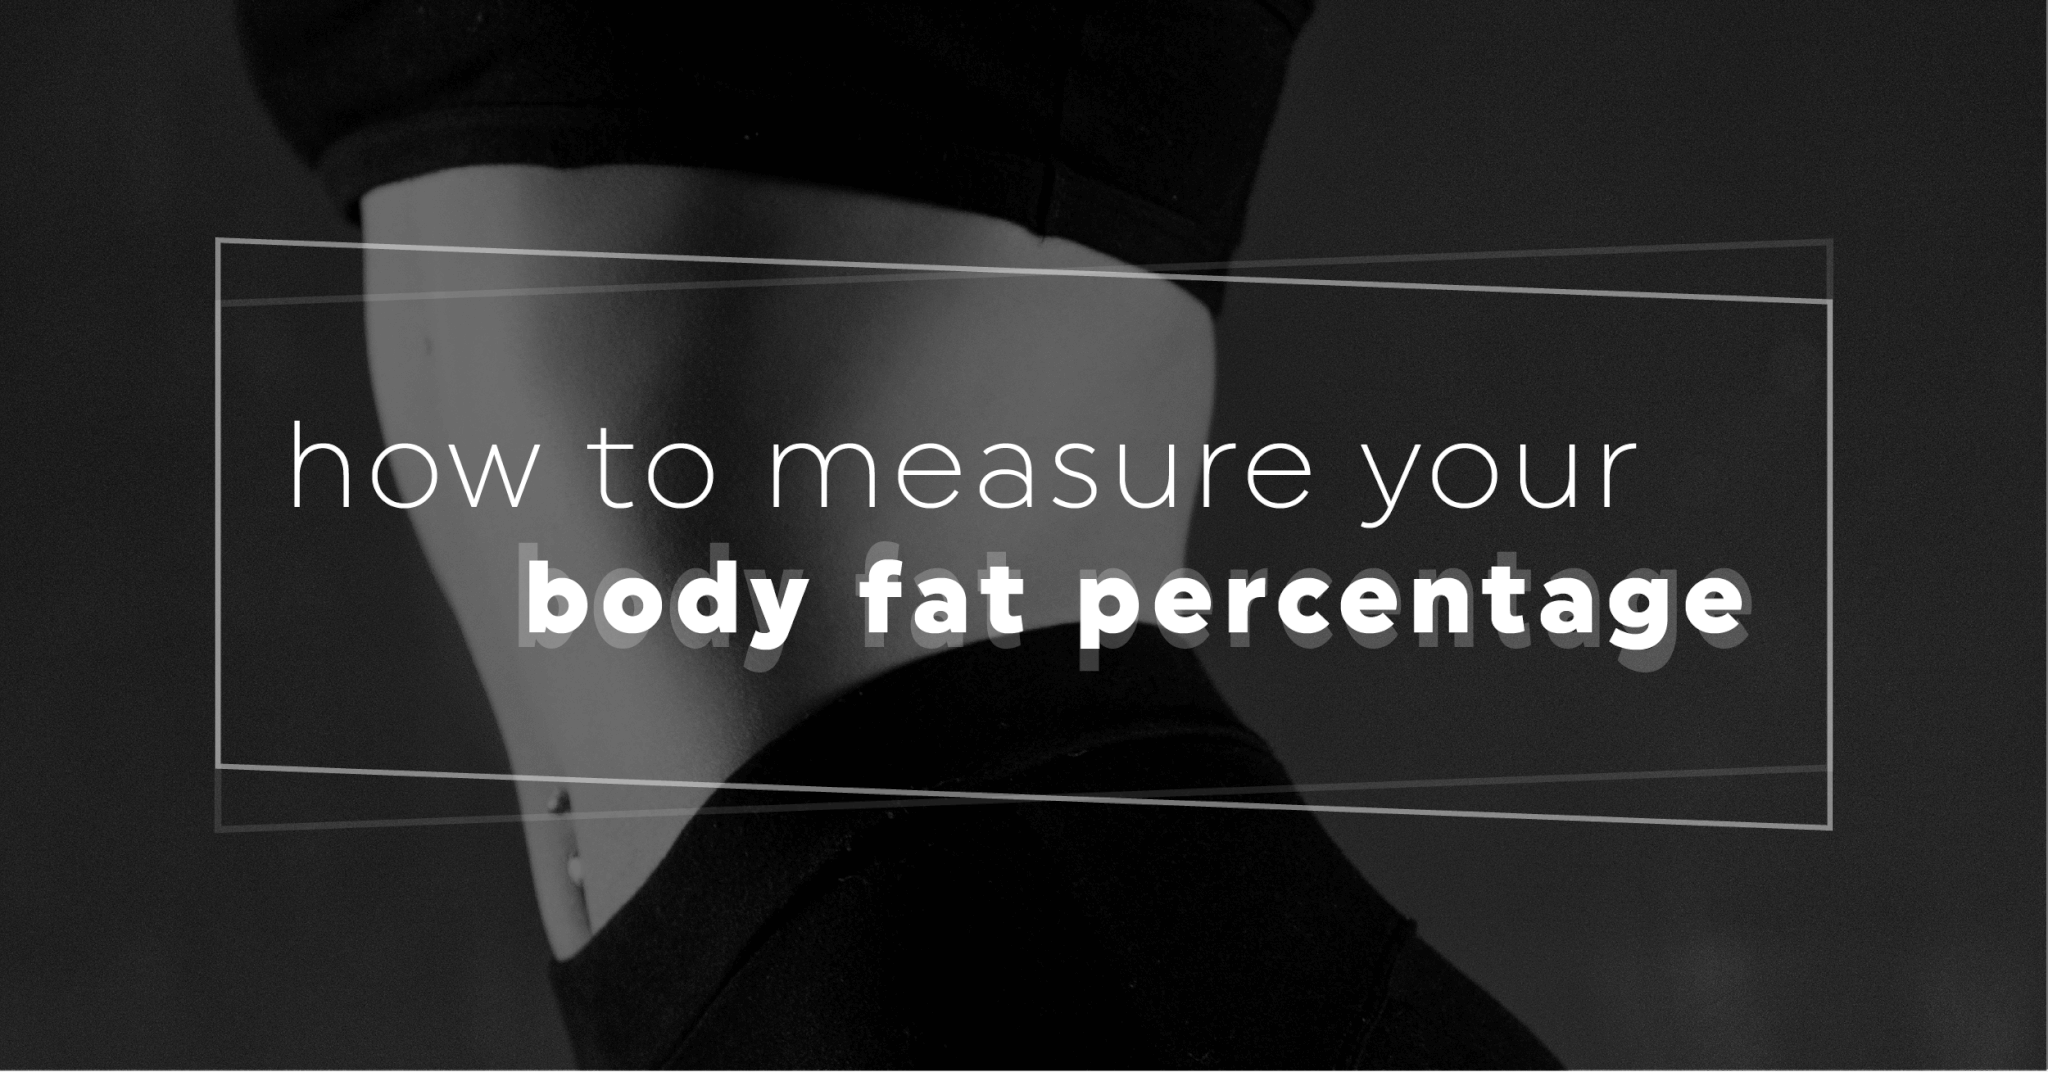 How To Measure Body Fat Percentage: 8 Accurate Techniques